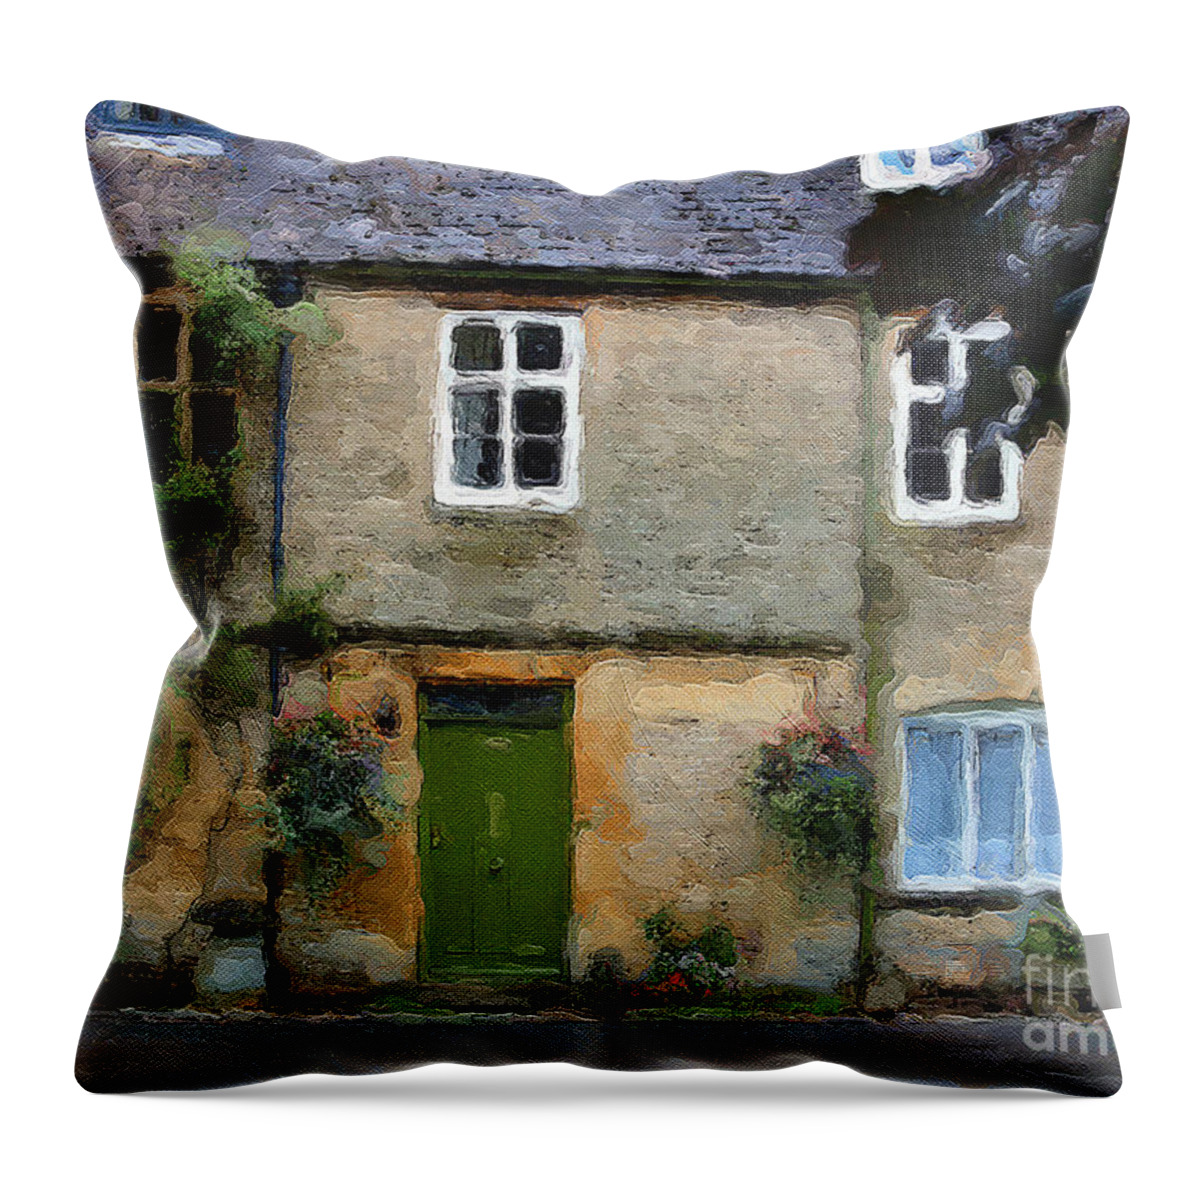 Stow-in-the-wold Throw Pillow featuring the photograph Stow Facade by Brian Watt